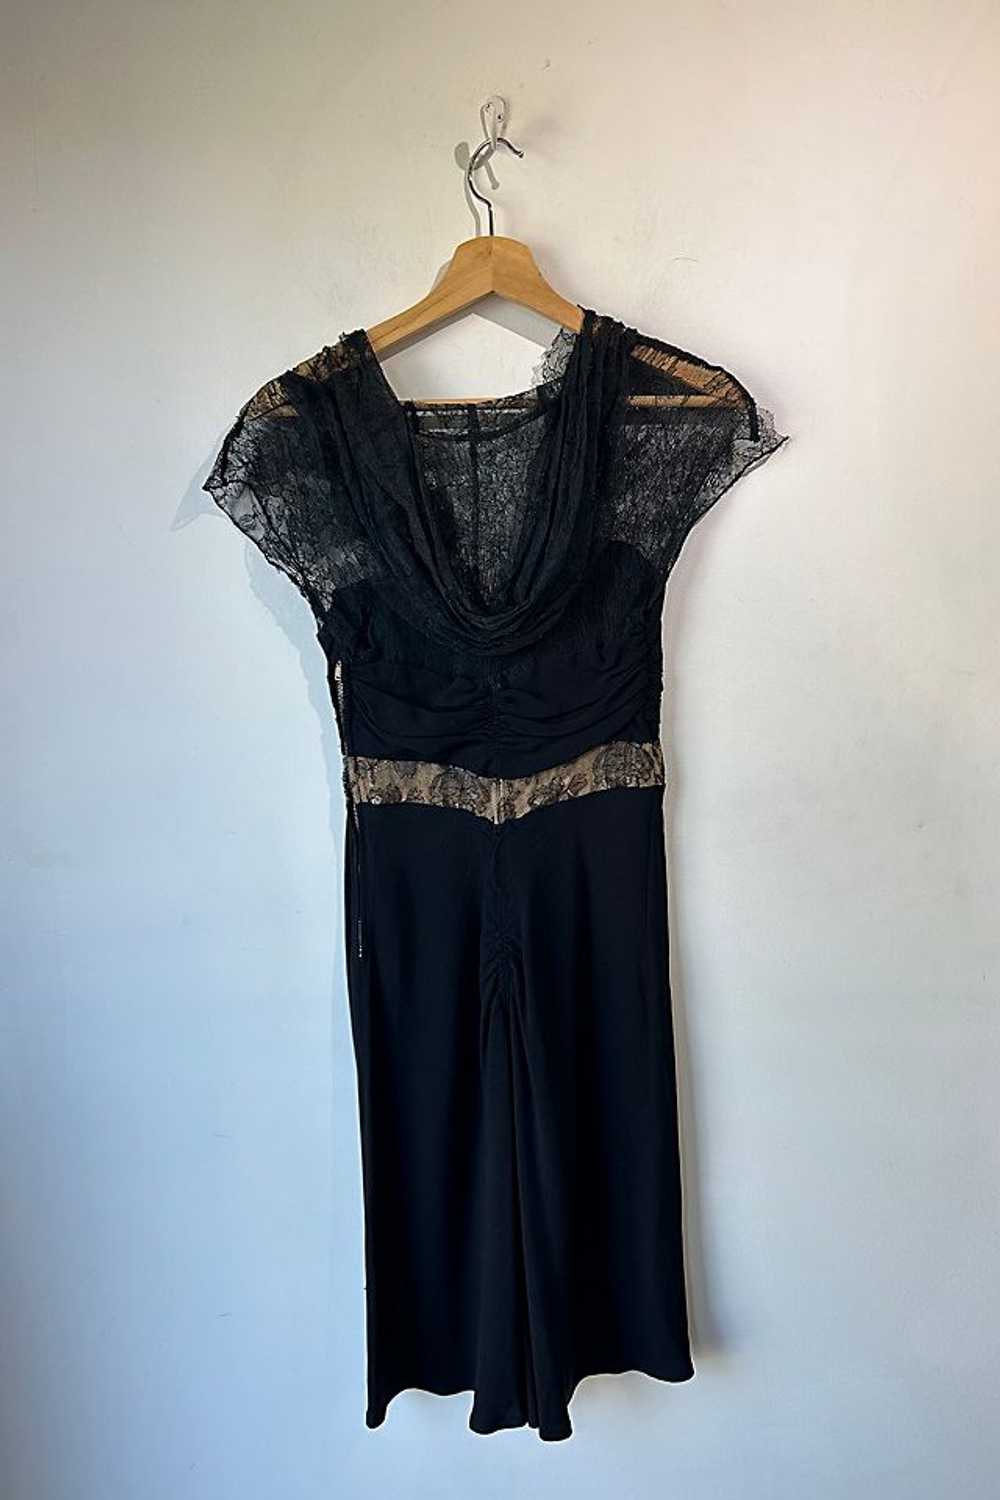 Vintage 1940s Black Dress with Lace Hood Selected… - image 1